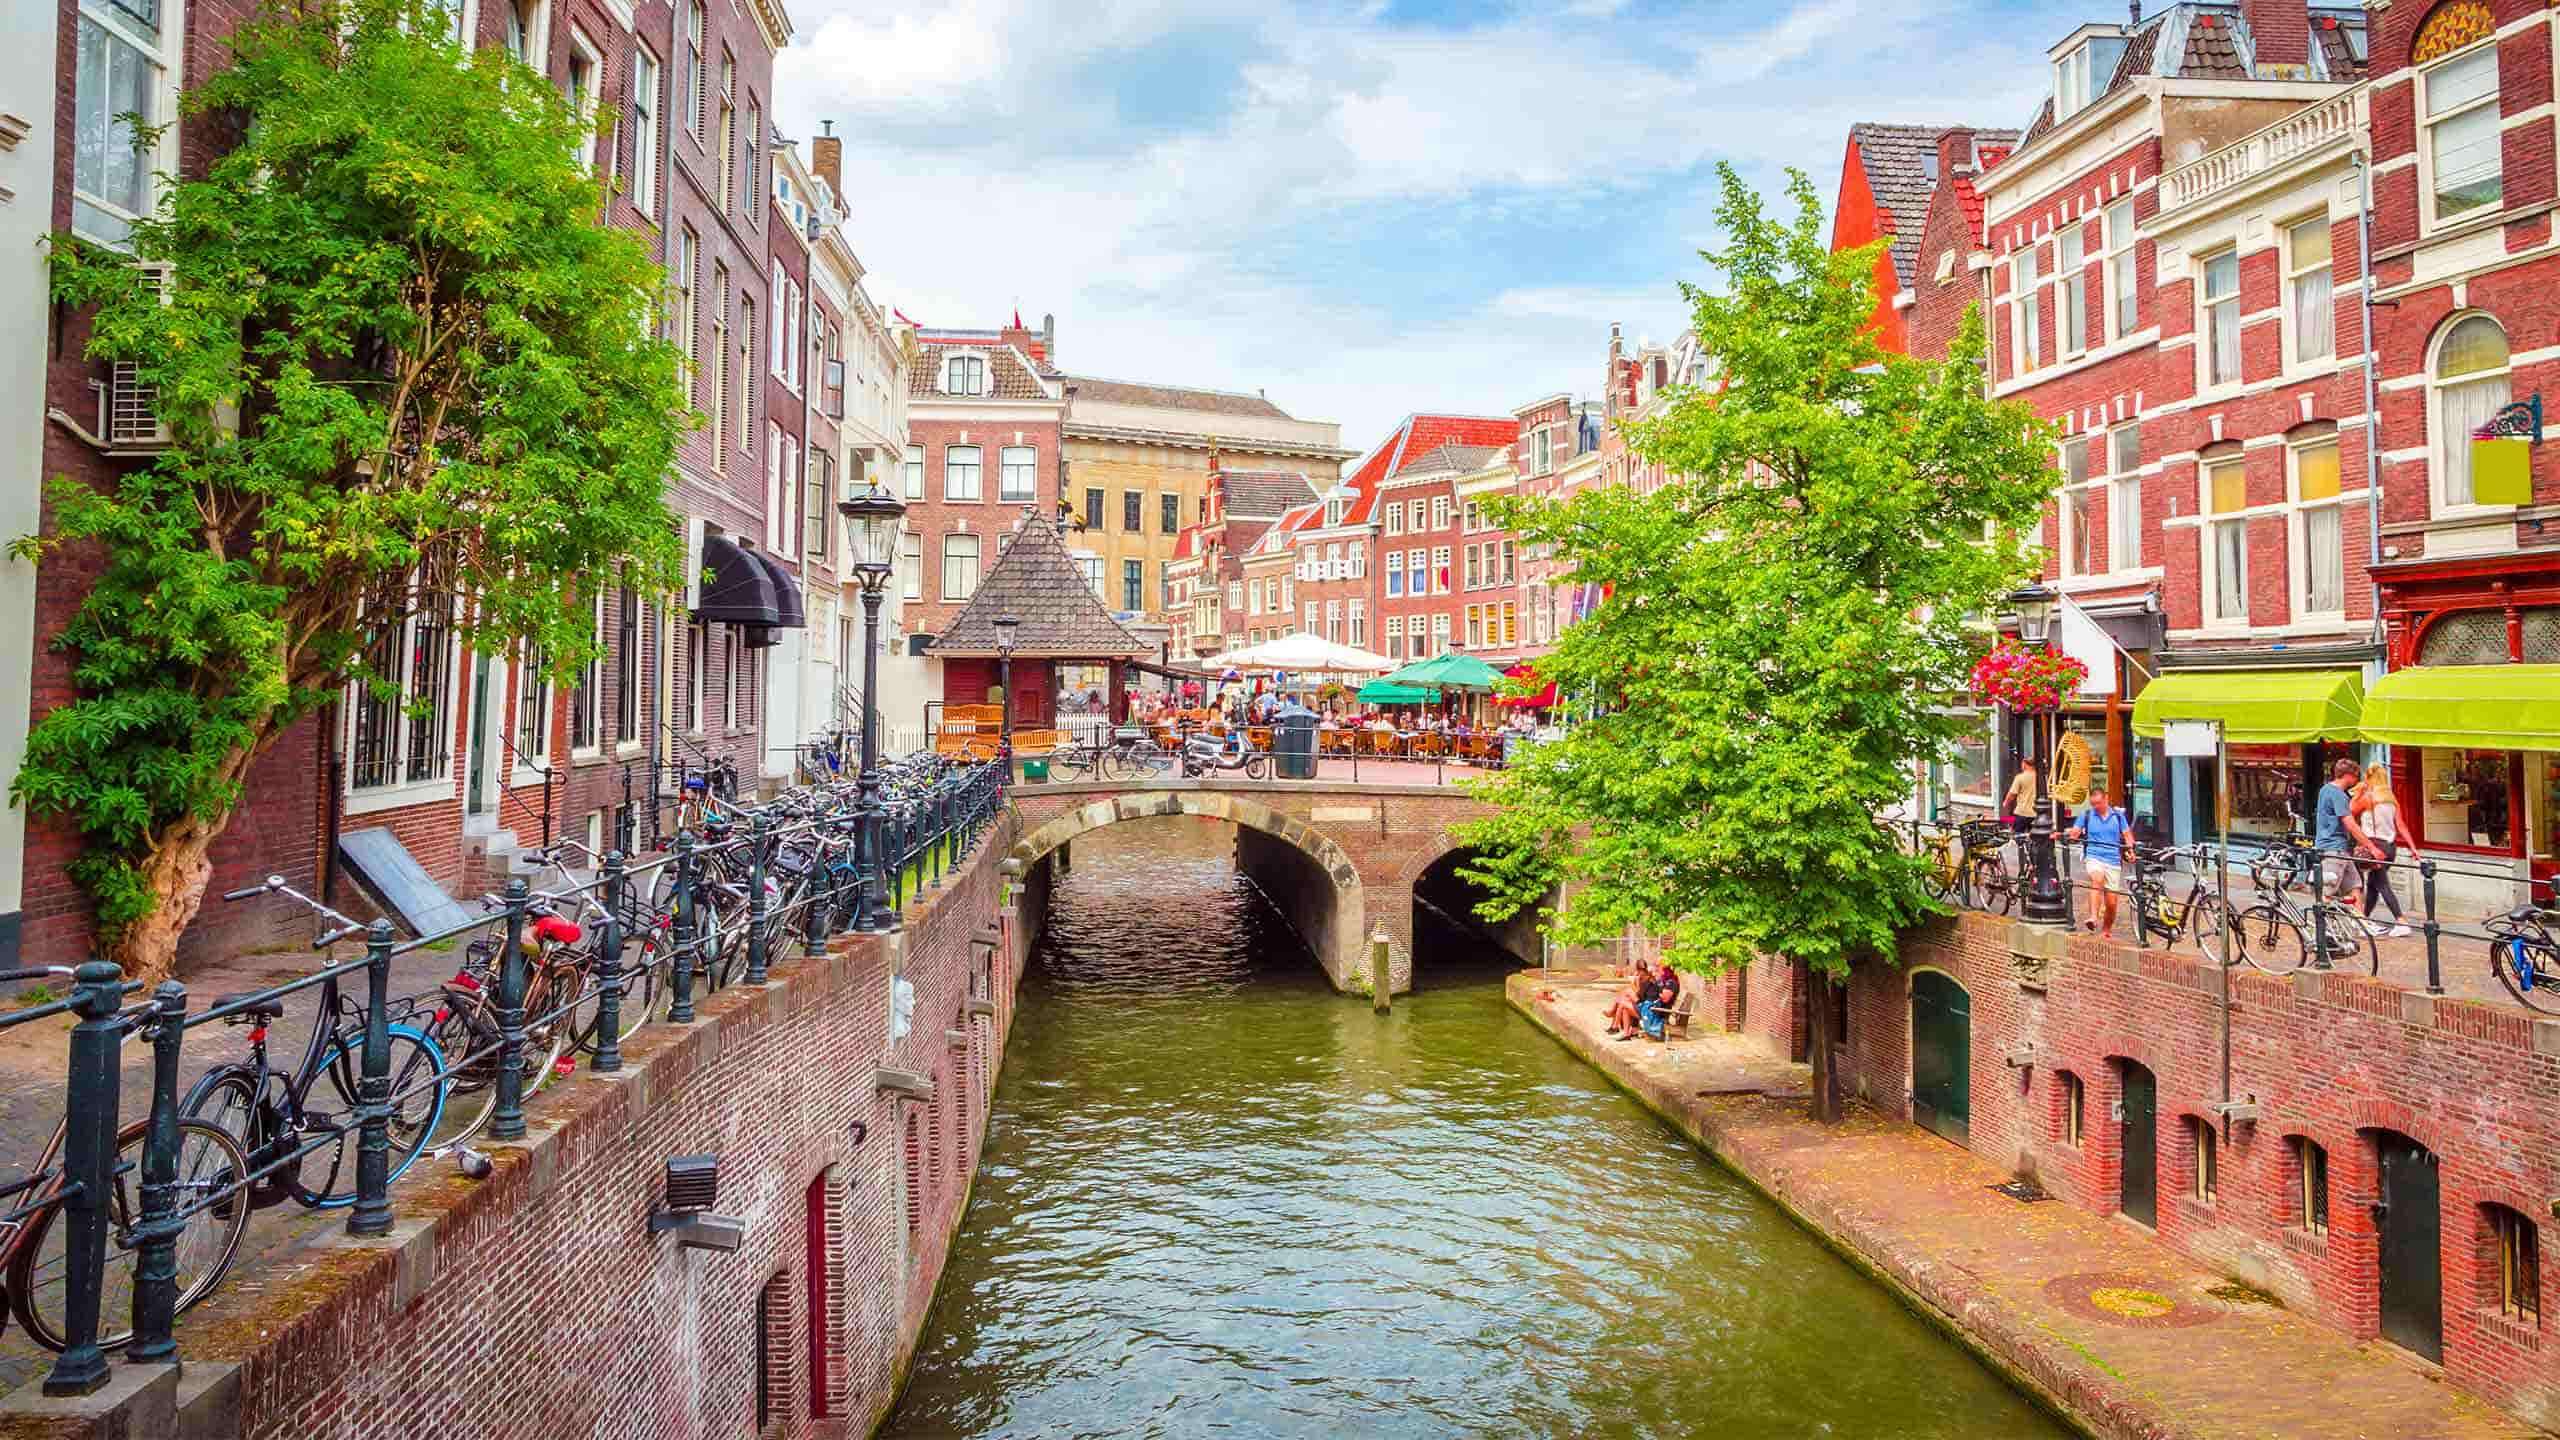 Luxury Netherlands & Belgium Walk (Windmills, Tulips, Canals & Villages) 6D5N, Fully Guided